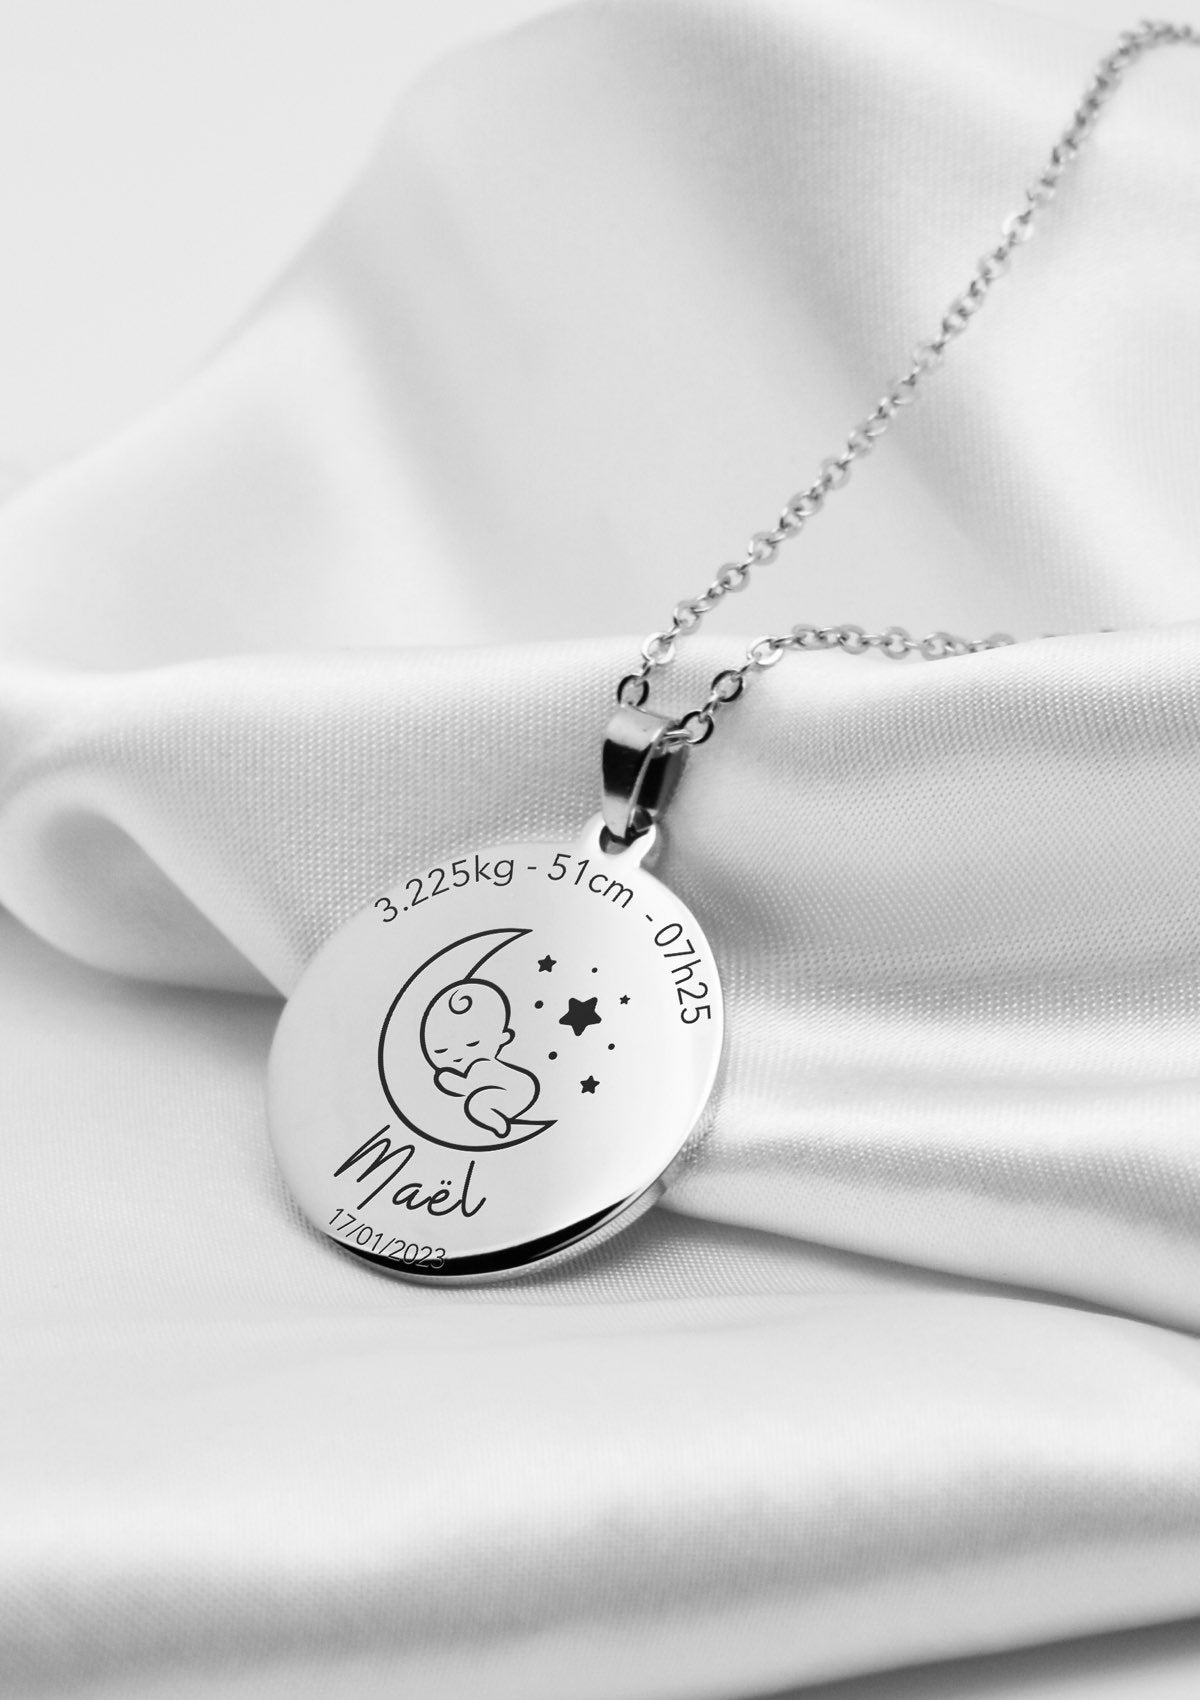 Birth Necklace - Little Moon | Silver